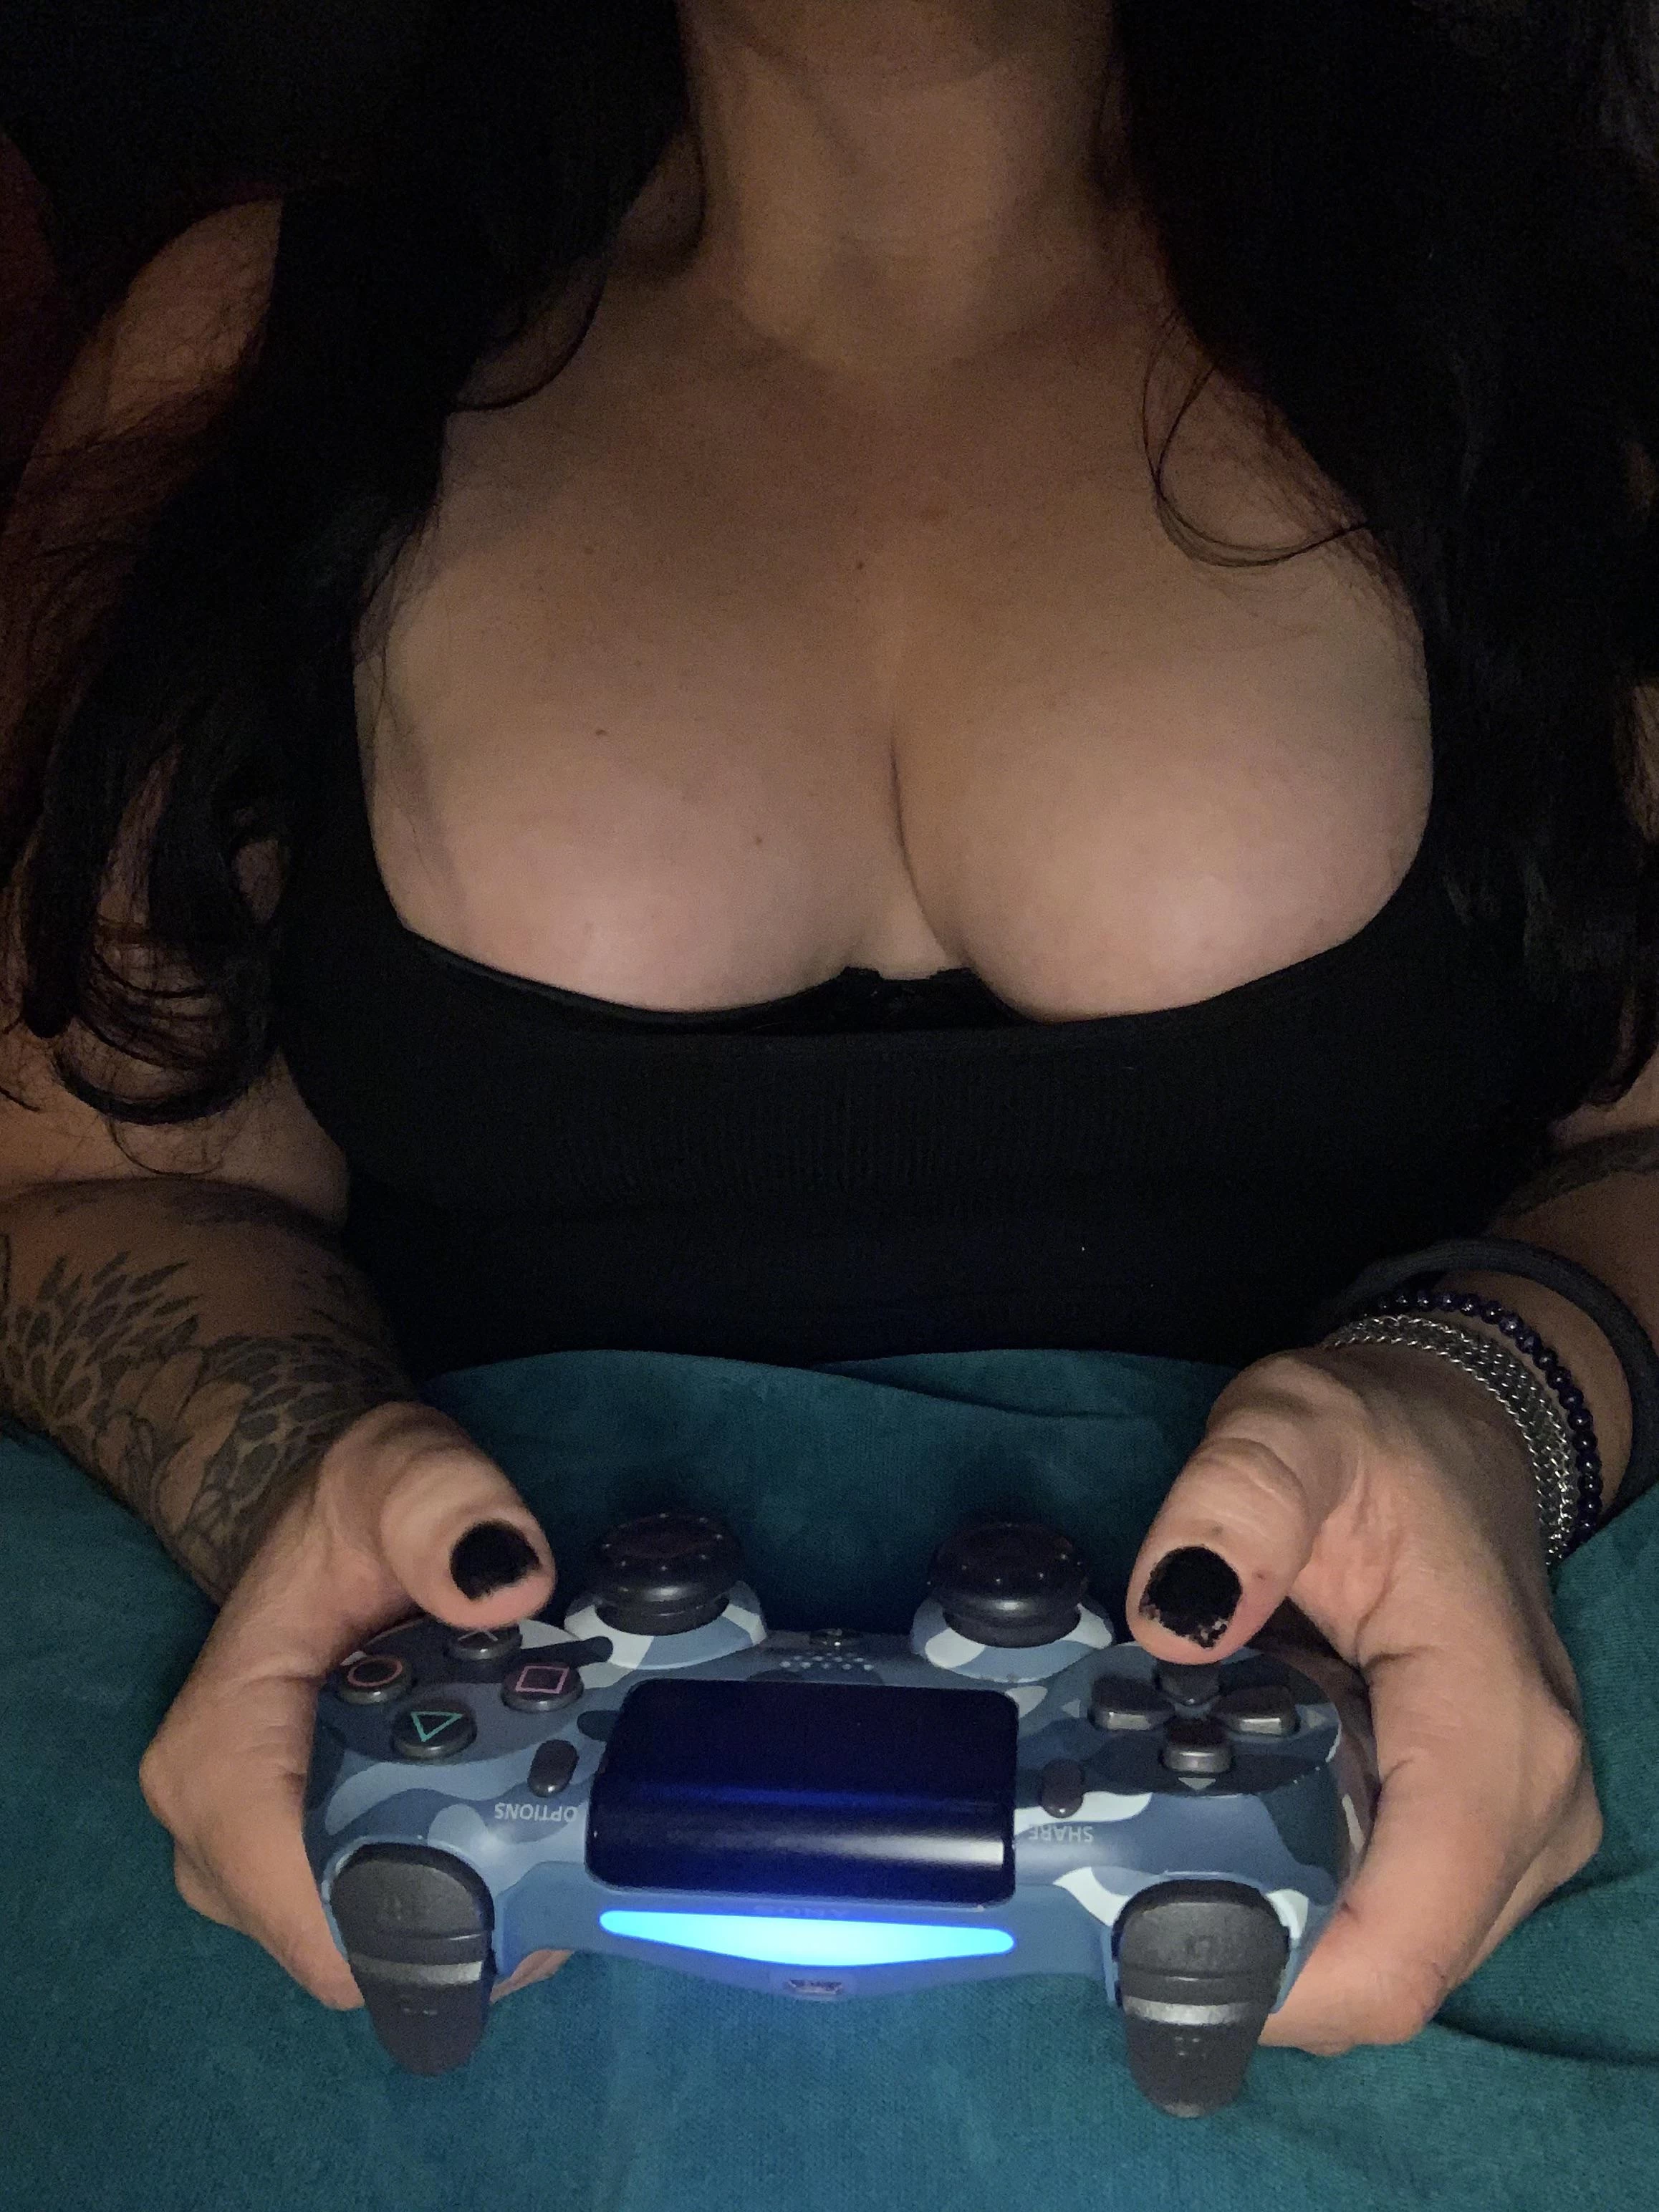 Call of Duty Cleavage?